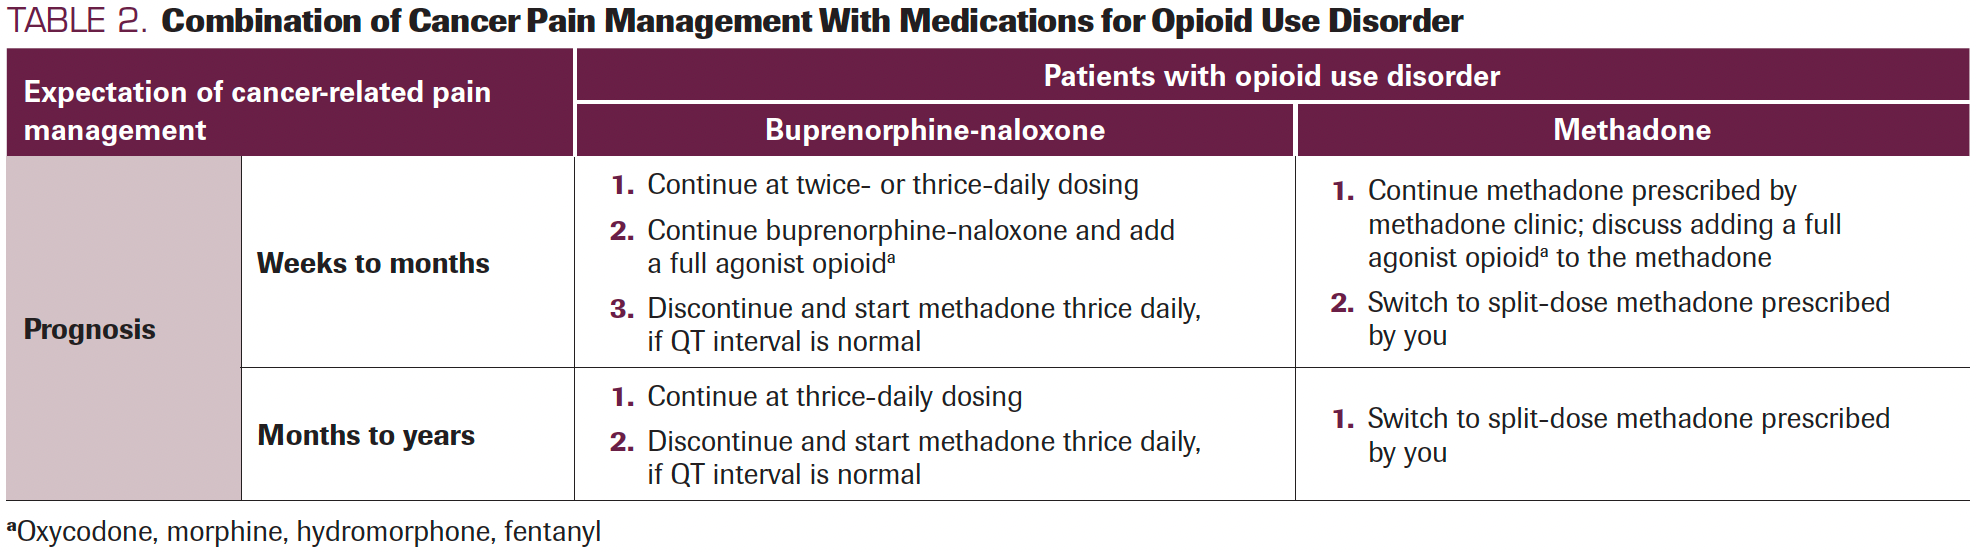 TABLE 2. Combination of Cancer Pain Management With Medications for Opioid Use Disorder